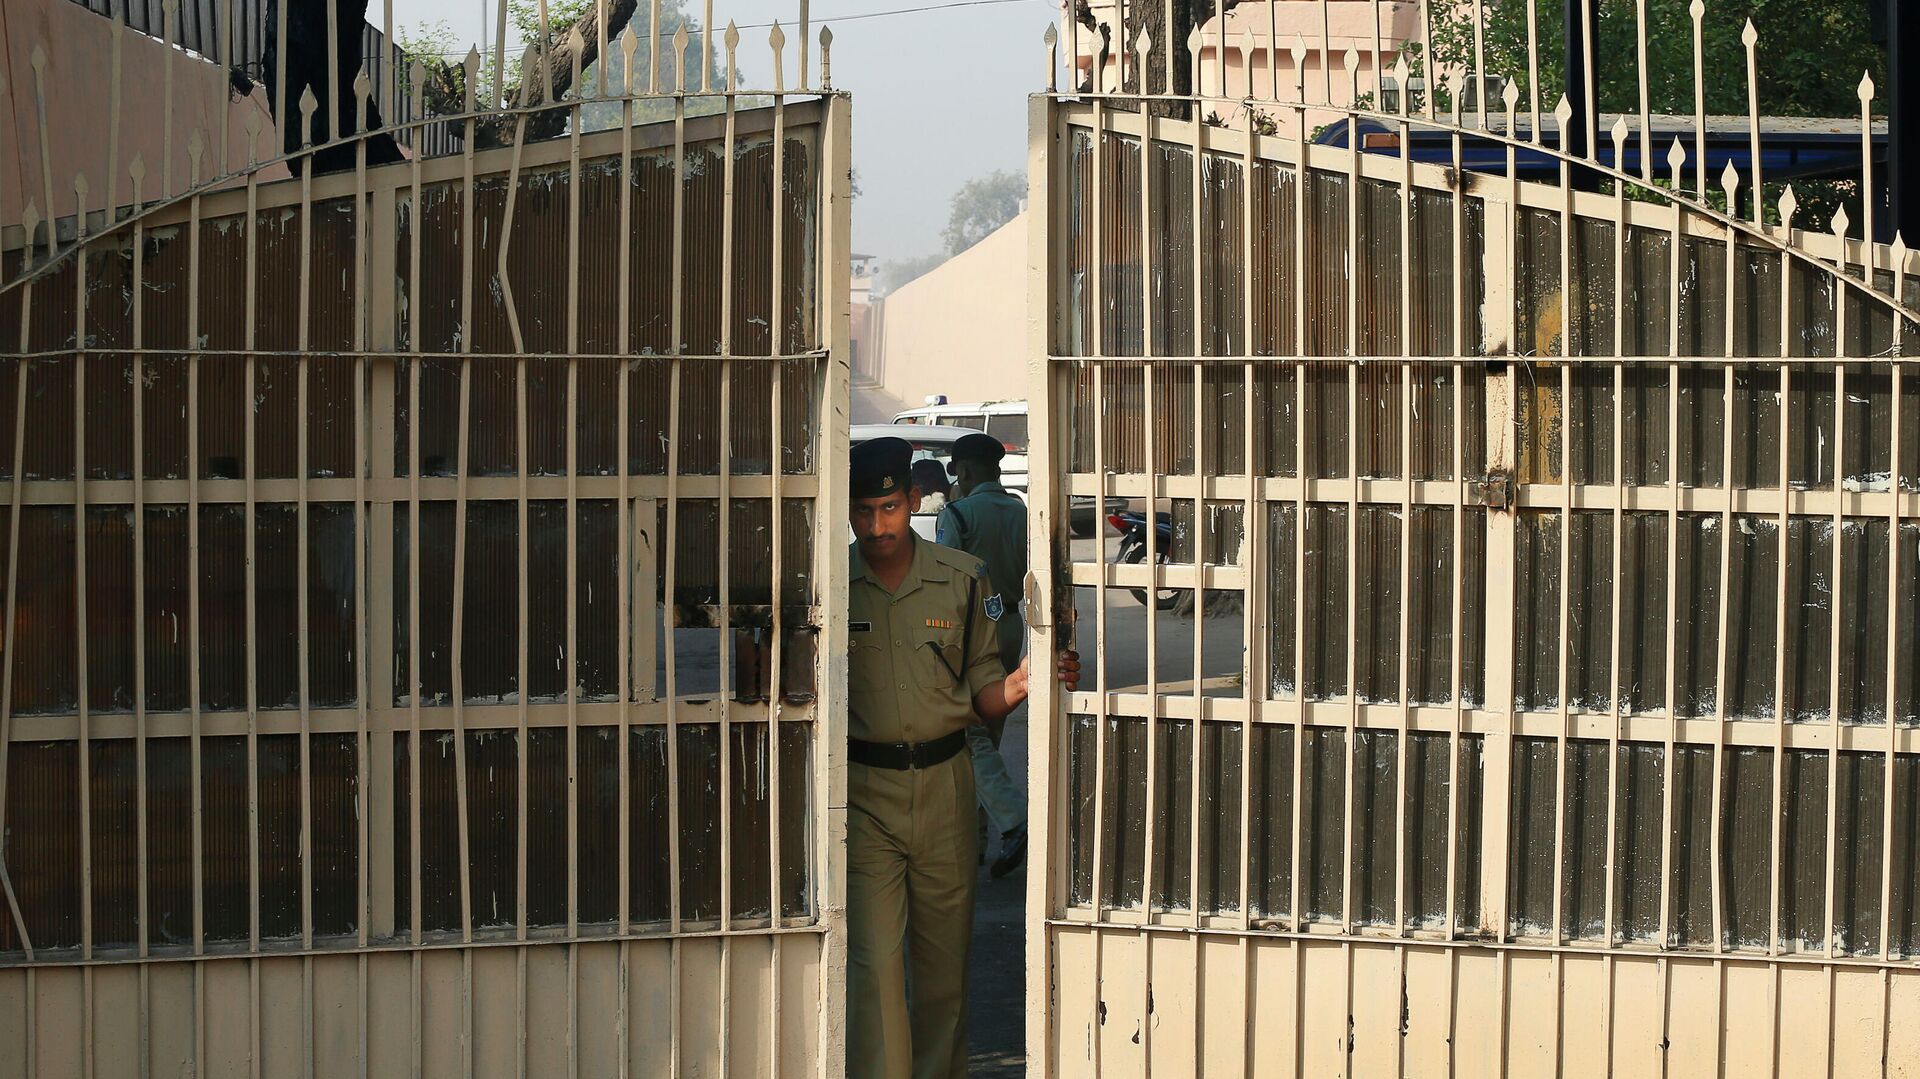 An Indian police officer prepares to close one of the gates at Tihar Jail, the largest complex of prisons in South Asia, in New Delhi, India, Monday, March 11, 2013 - اسپوتنیک افغانستان  , 1920, 01.01.2023